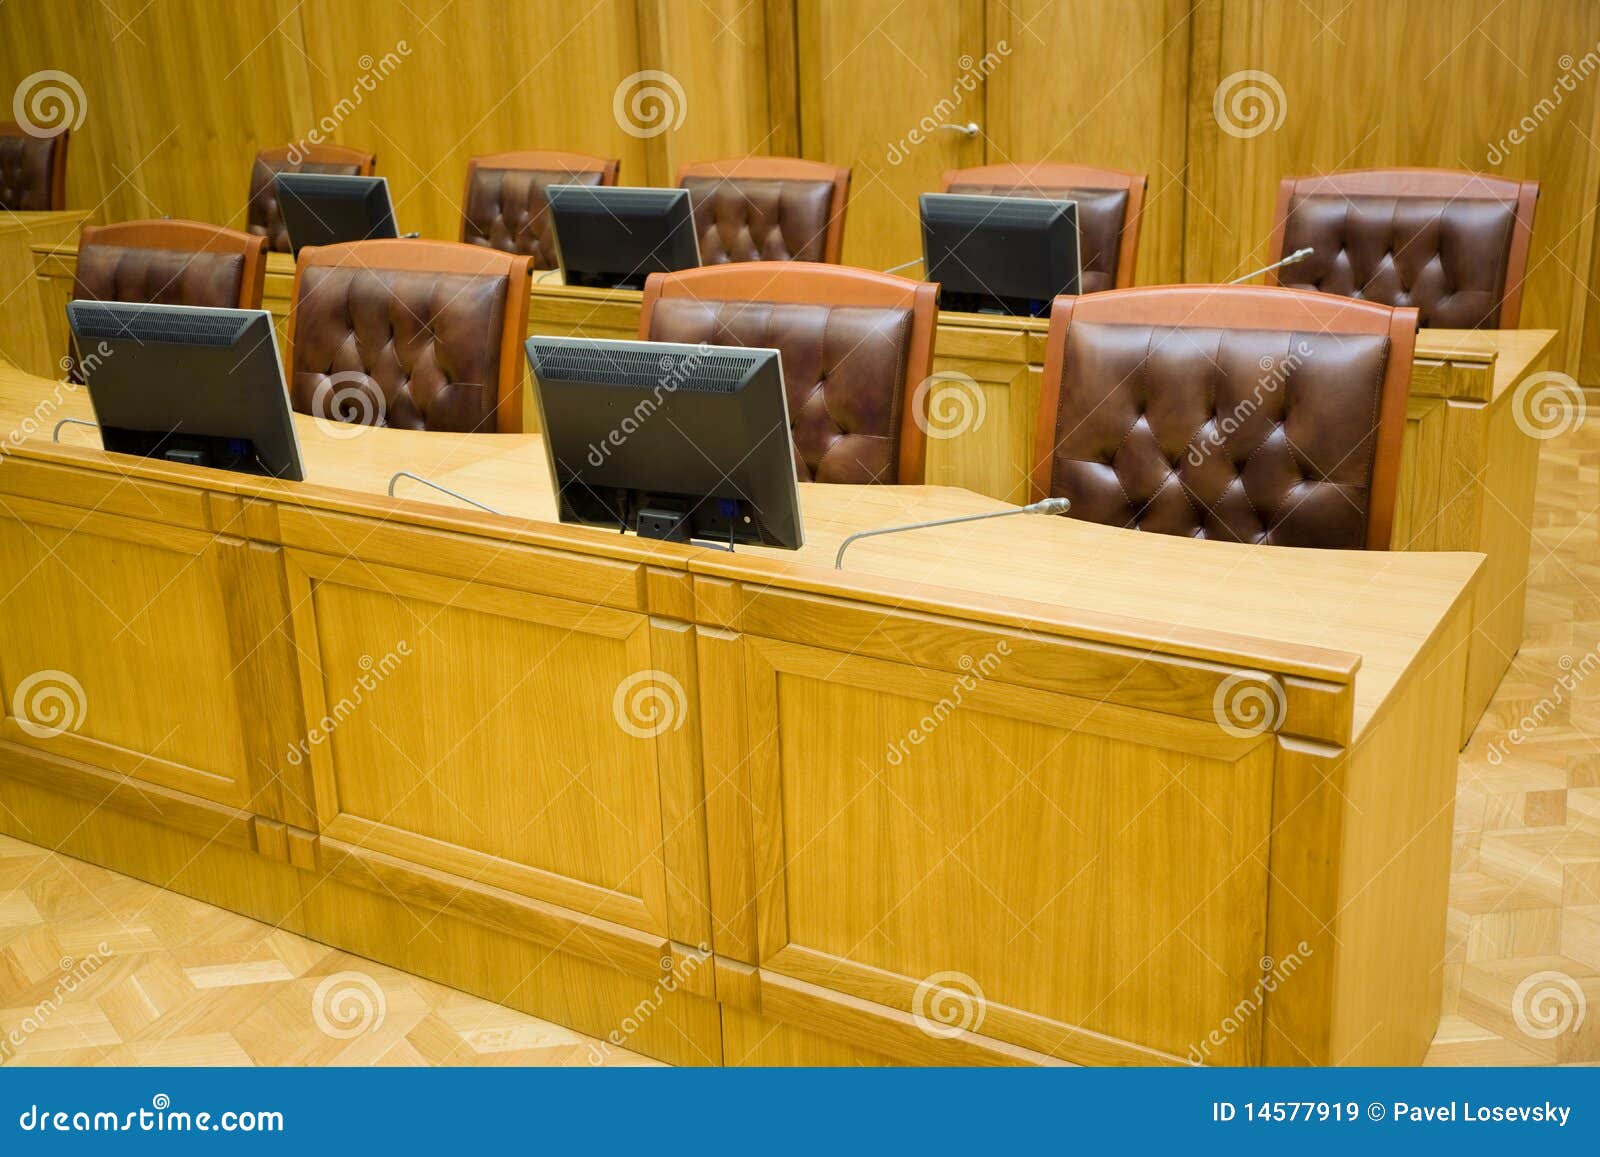 conference halls with leather armchairs and tables